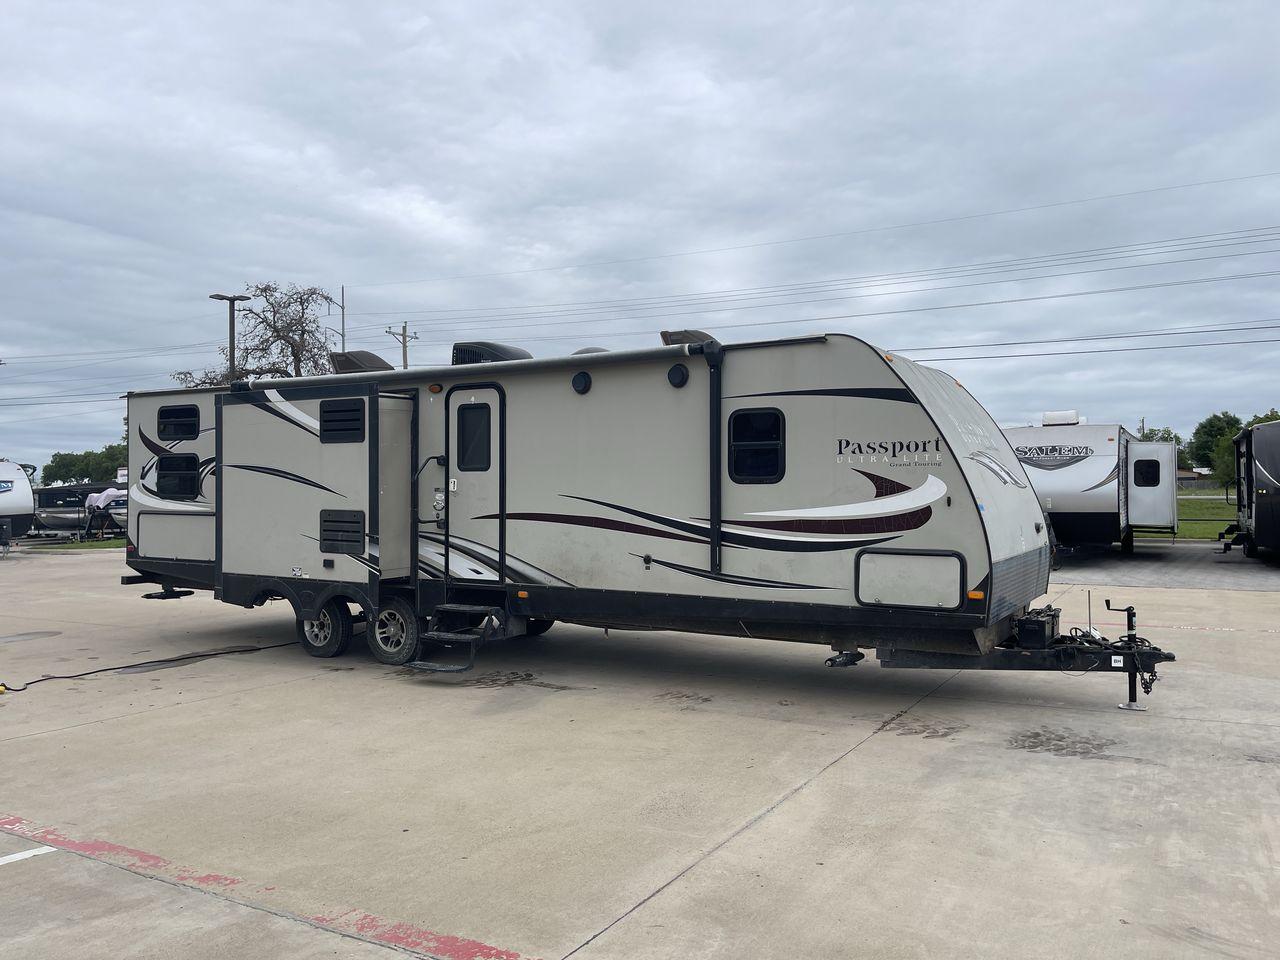 2015 WHITE KEYSTONE PASSPORT 3320 BH - (4YDT33229FT) , Length: 36.83 ft. | Dry Weight: 6,590 lbs. | Gross Weight: 8,000 lbs. | Slides: 3 transmission, located at 4319 N Main Street, Cleburne, TX, 76033, (817) 221-0660, 32.435829, -97.384178 - With the 2015 Keystone Passport 3320BH travel trailer, you can easily bring friends along for a fun camping adventure. This unit measures 36.83 ft. in length and 10.92 ft. in height. It has a dry weight of 6,590 lbs. with a payload capacity of 1,410 lbs. The GVWR is about 8,000 lbs, and the hitch we - Photo #22